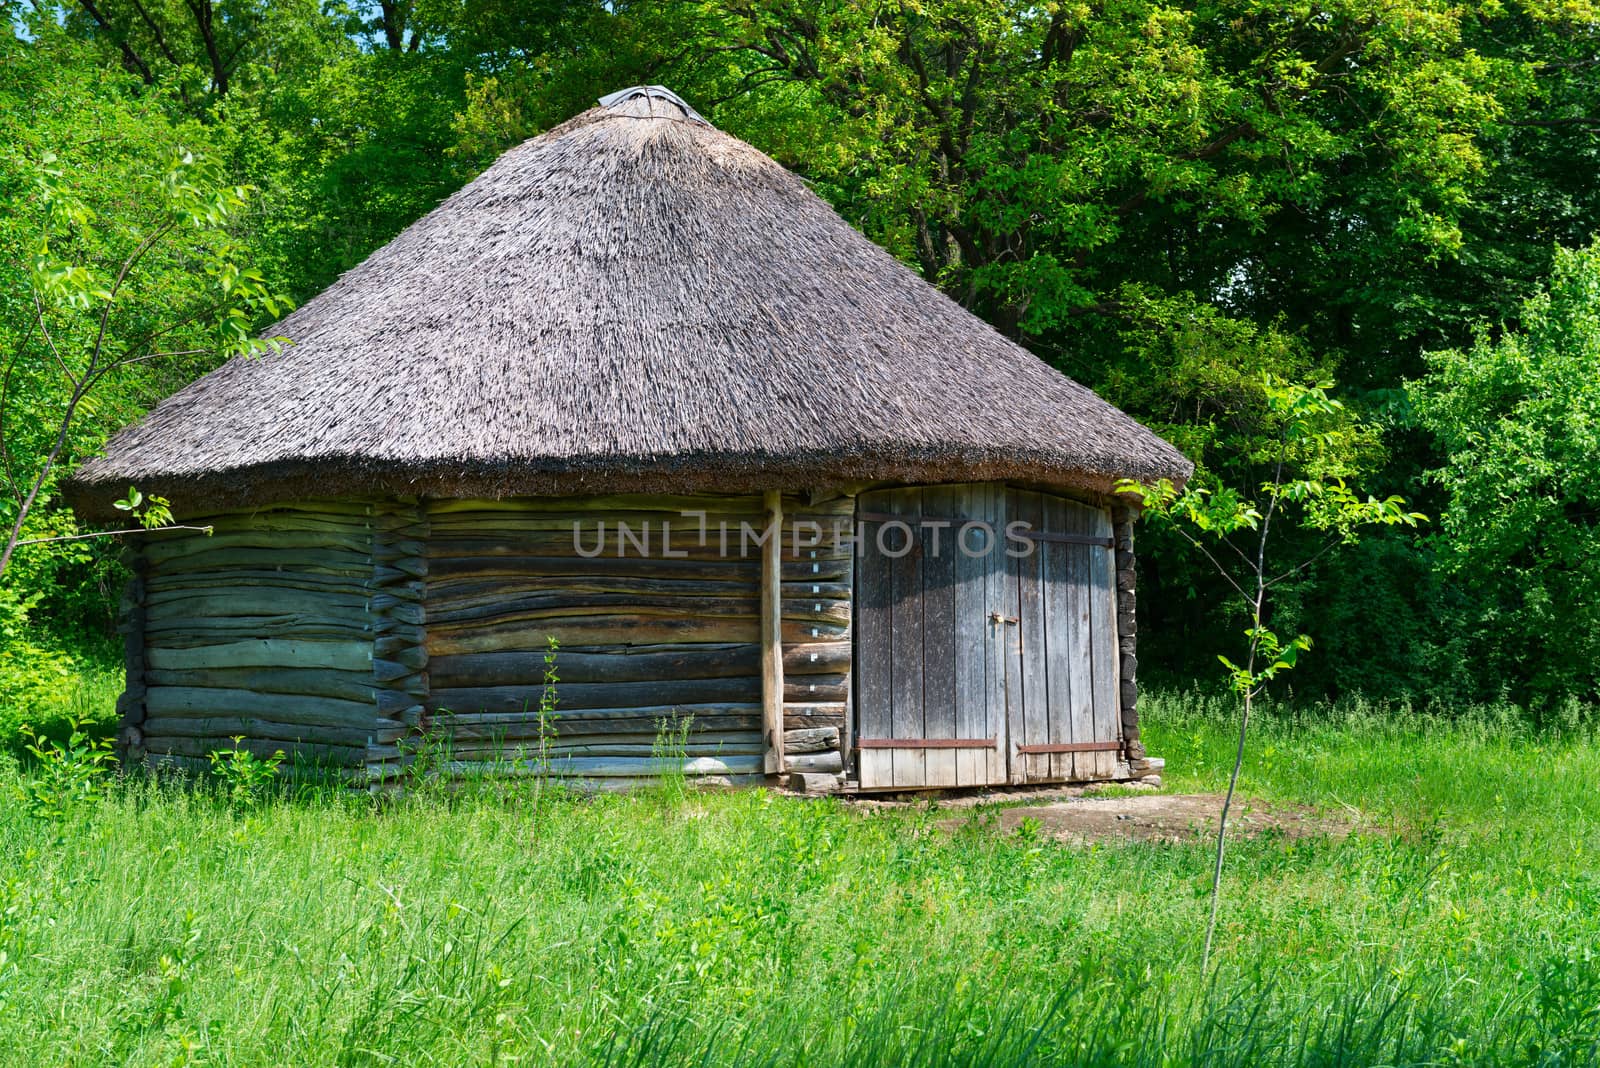 Typical traditional village antique wooden storehouse or barn